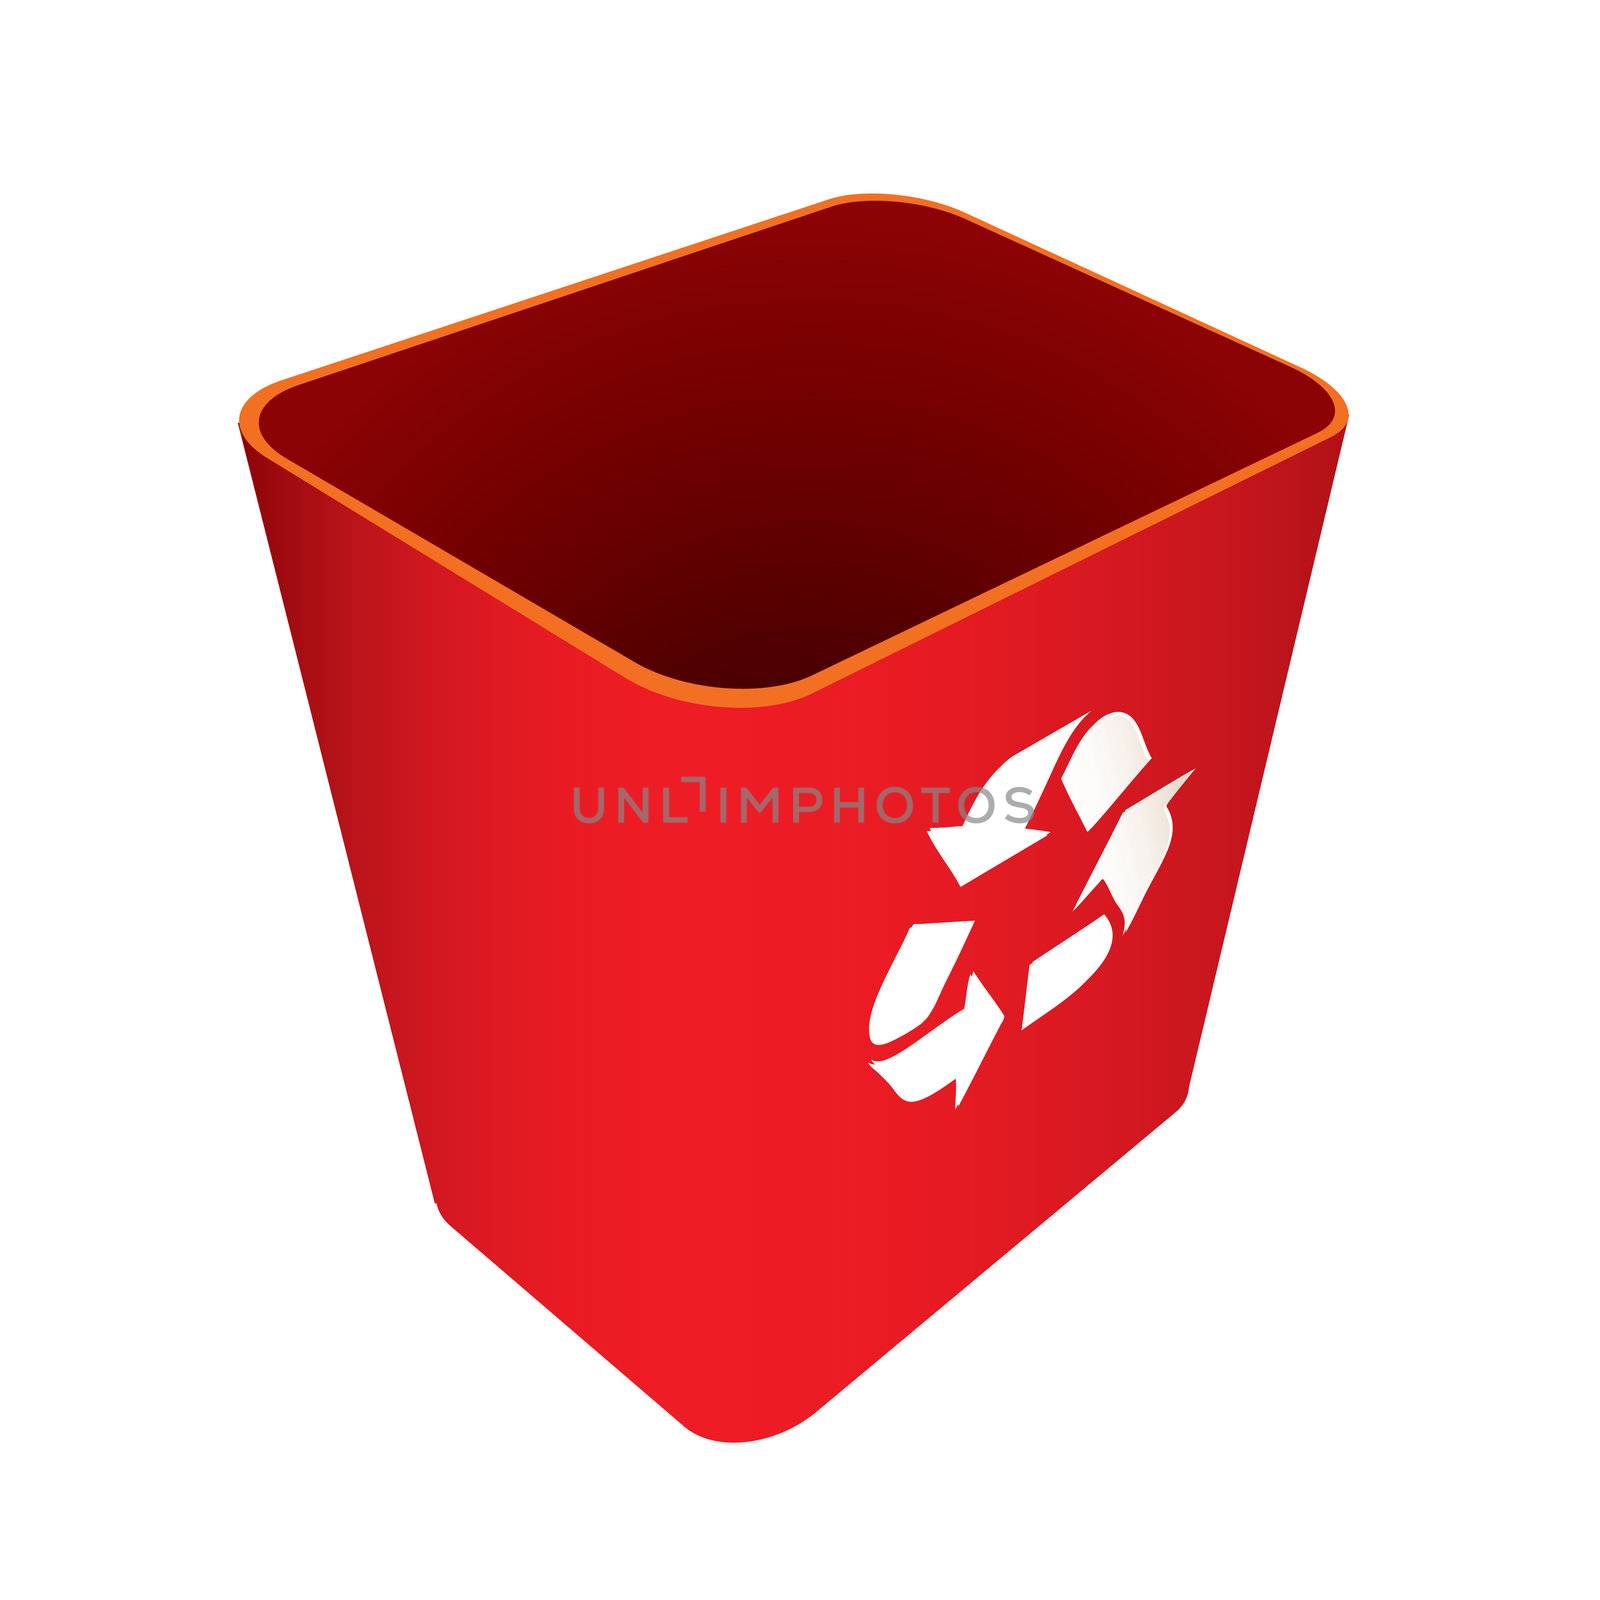 Red Recycle trash can or bin with symbol